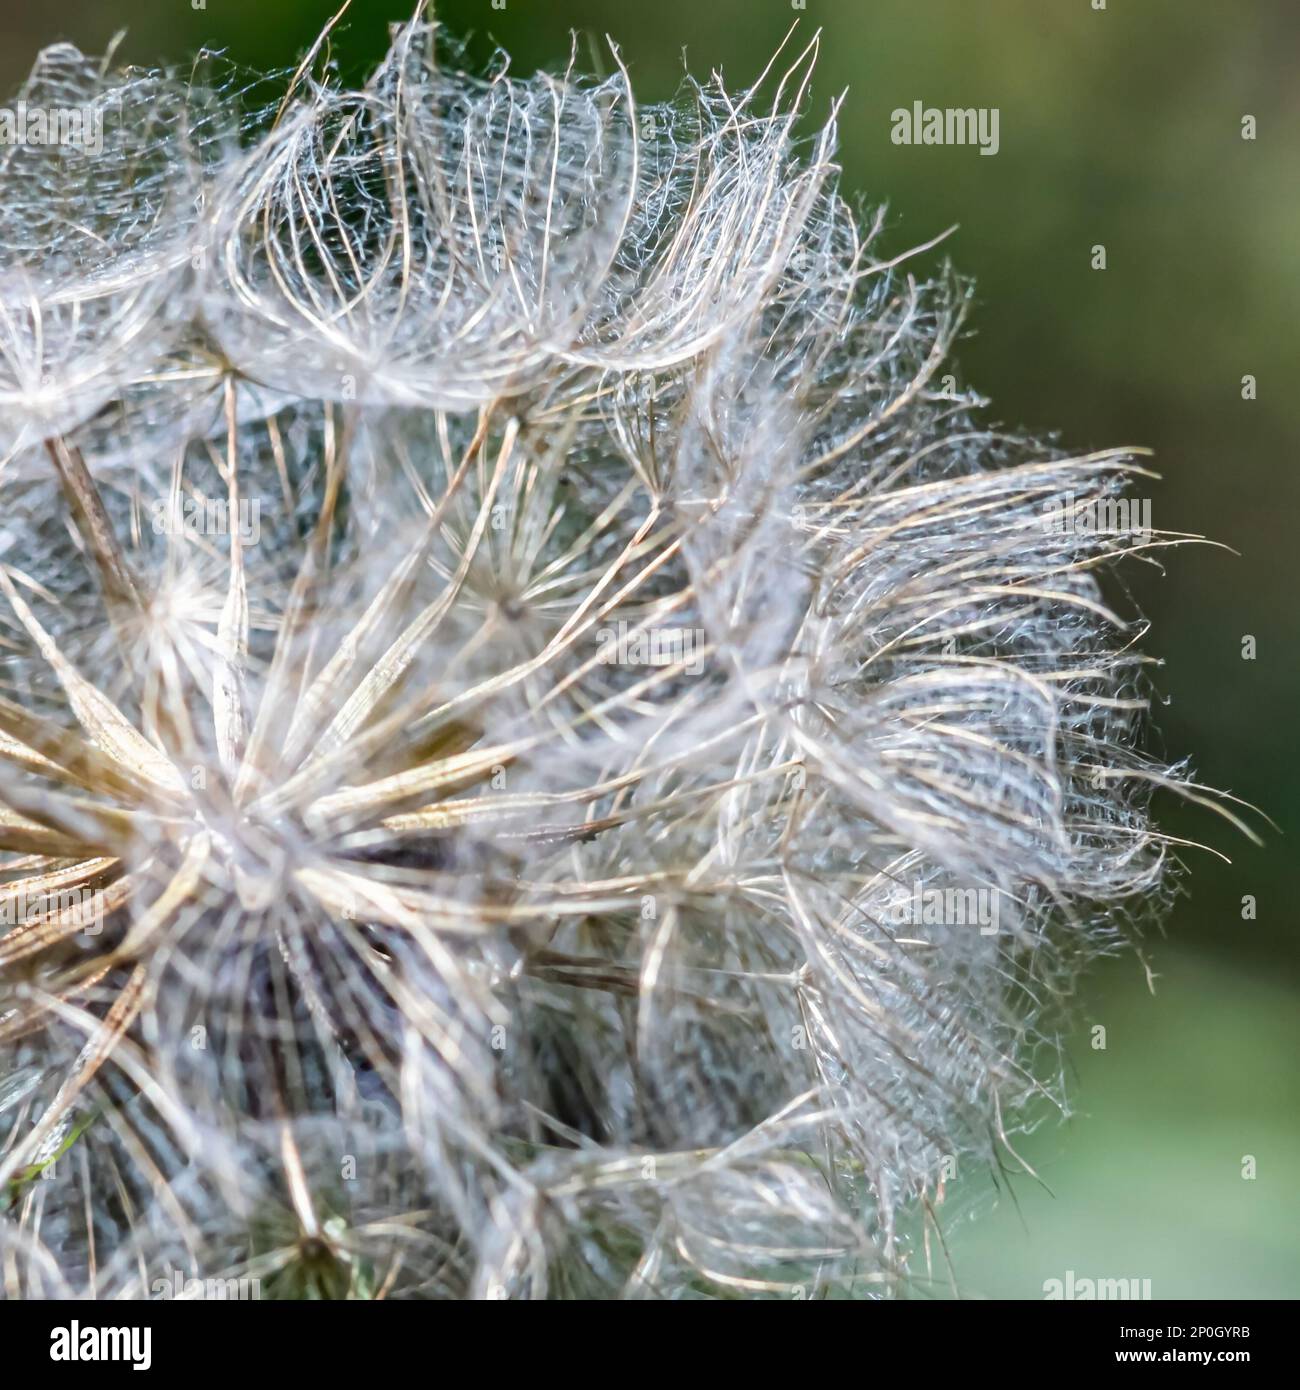 Goatgrass A large dandelion from the east on a green background Stock Photo